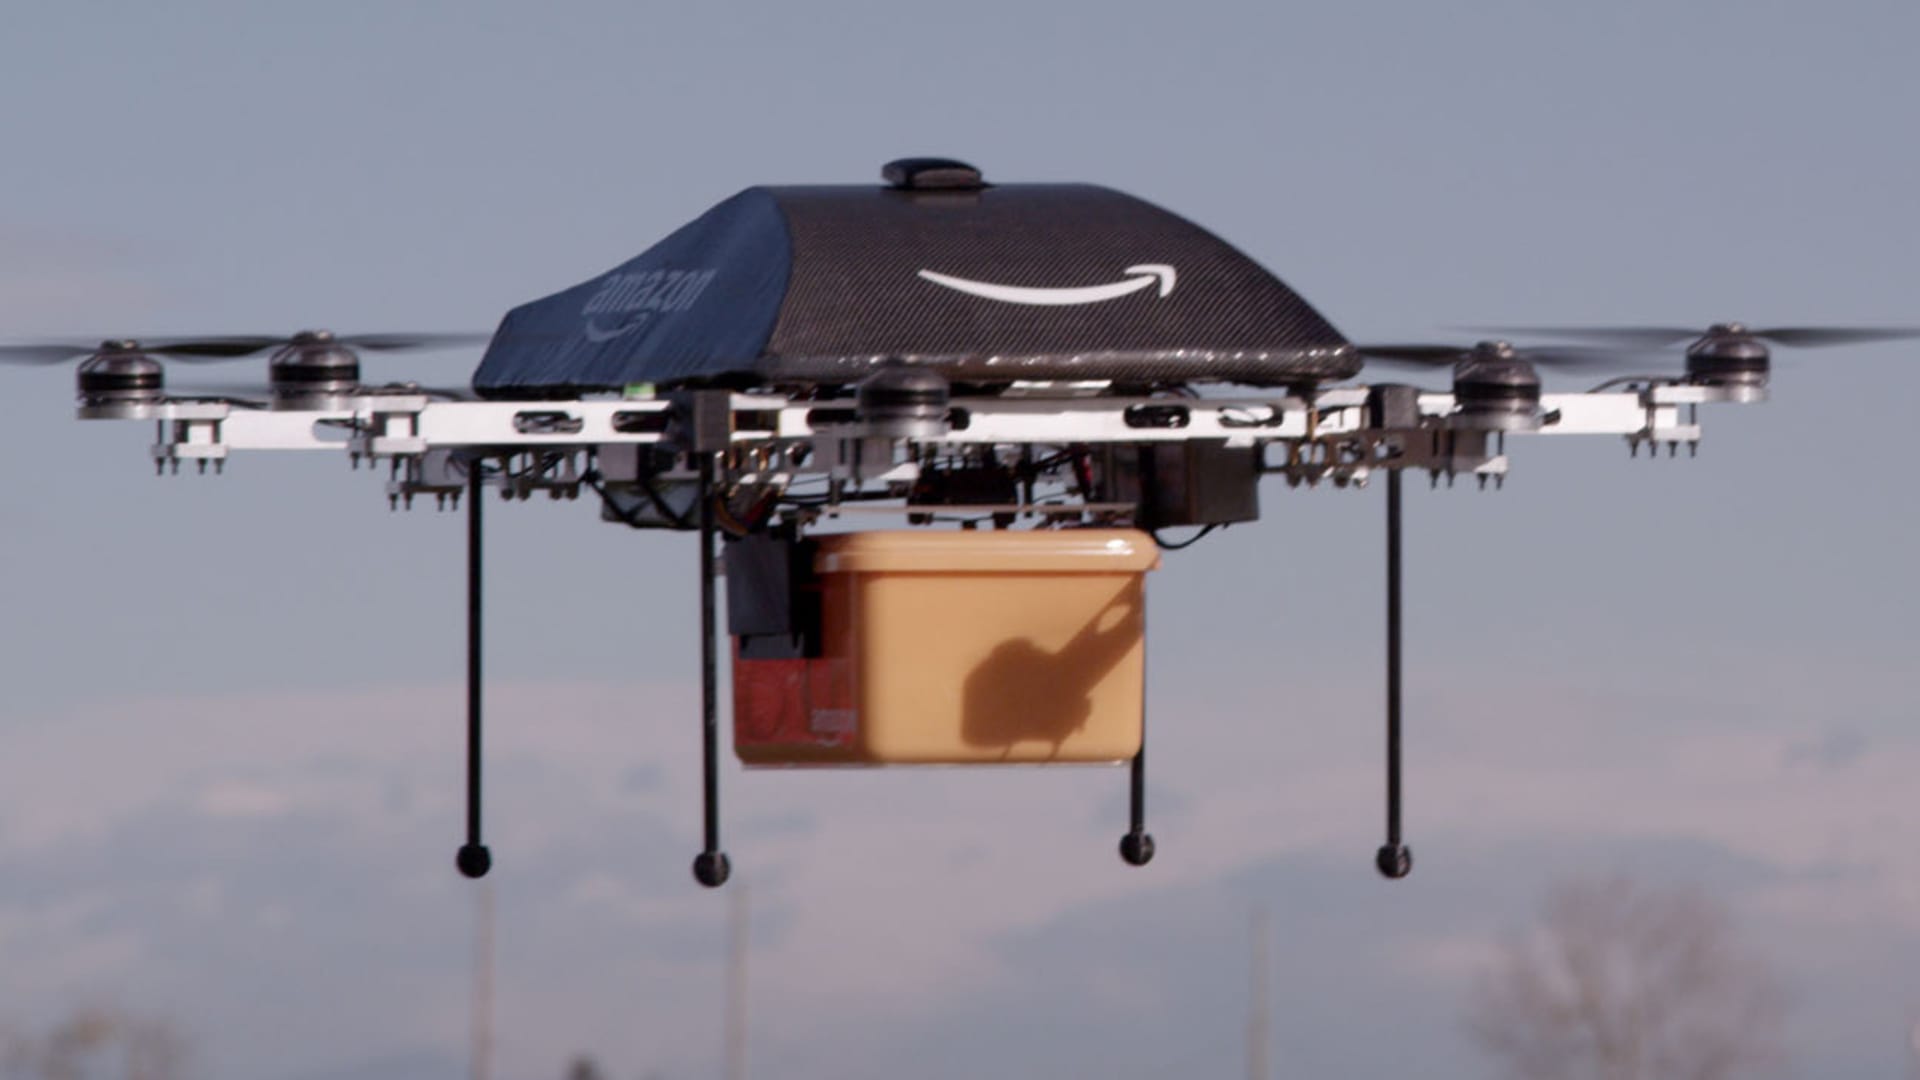 Amazon says it will begin delivering packages by drone in California later this year